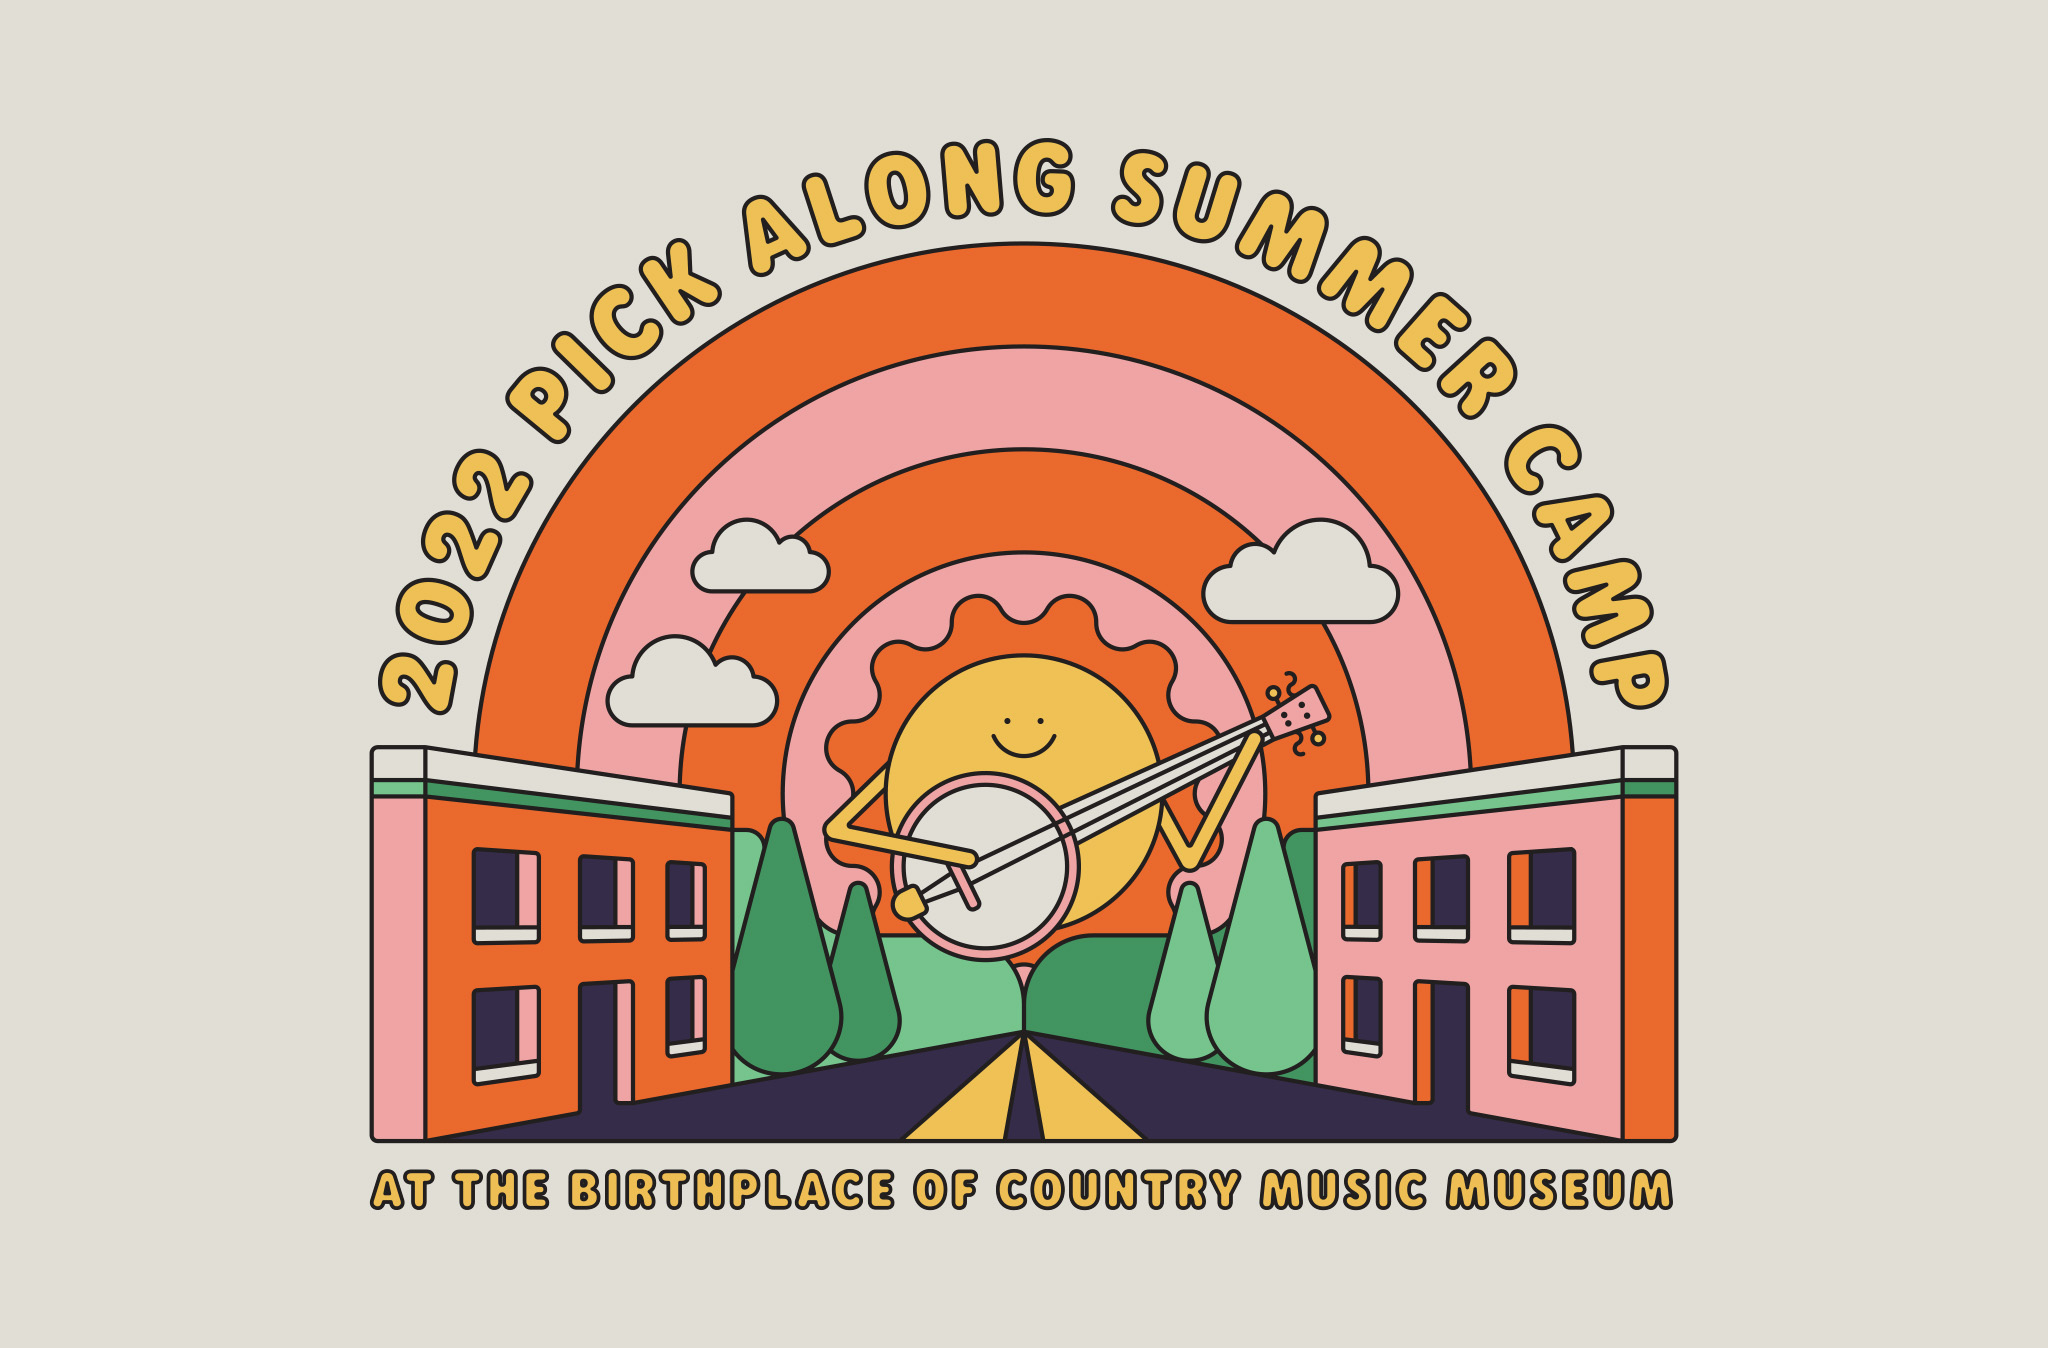 Pick Along Summer Camp graphic with a stick figure sun playing a banjo. Figure is standing in the middle of a street drawn to resemble State Street in Historic Downtown Bristol, VA-TN